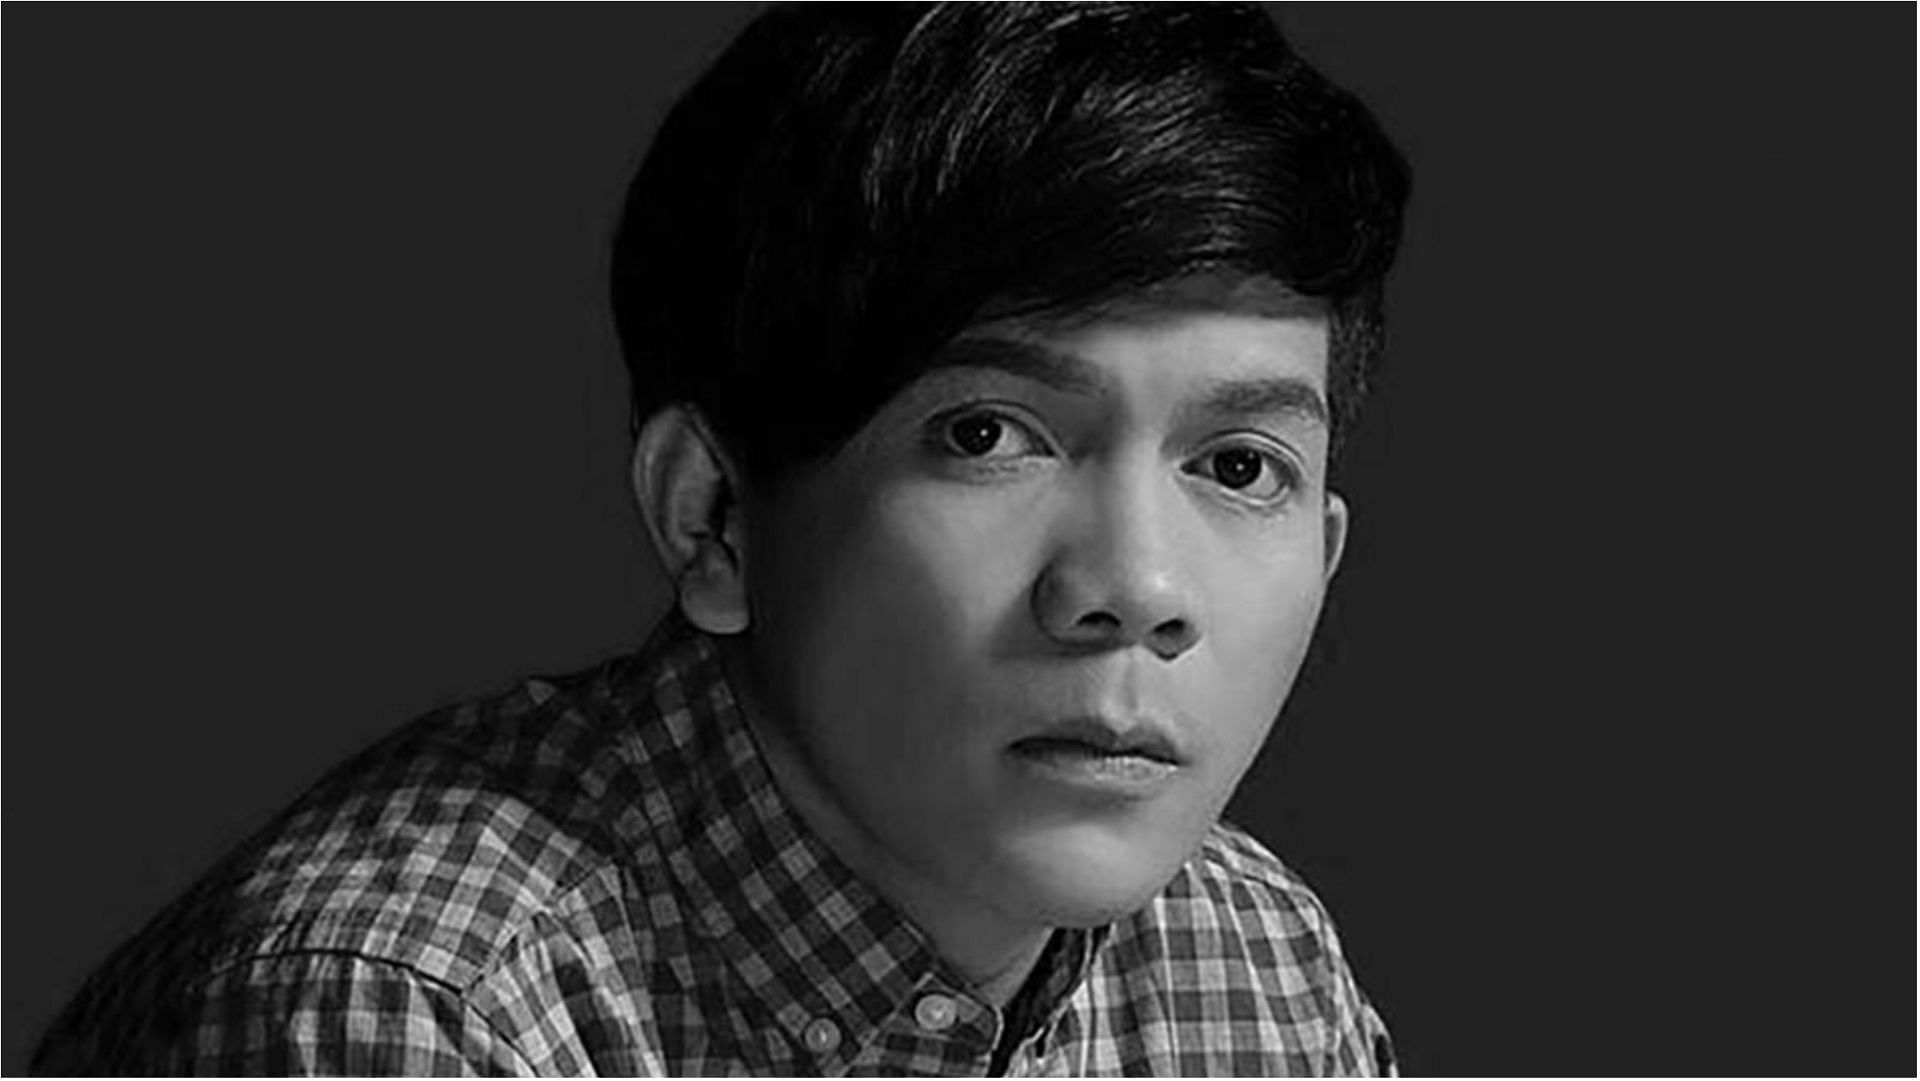 Jovit Baldivino recently died at the age of 29 (Image via jr_101885/Twitter)